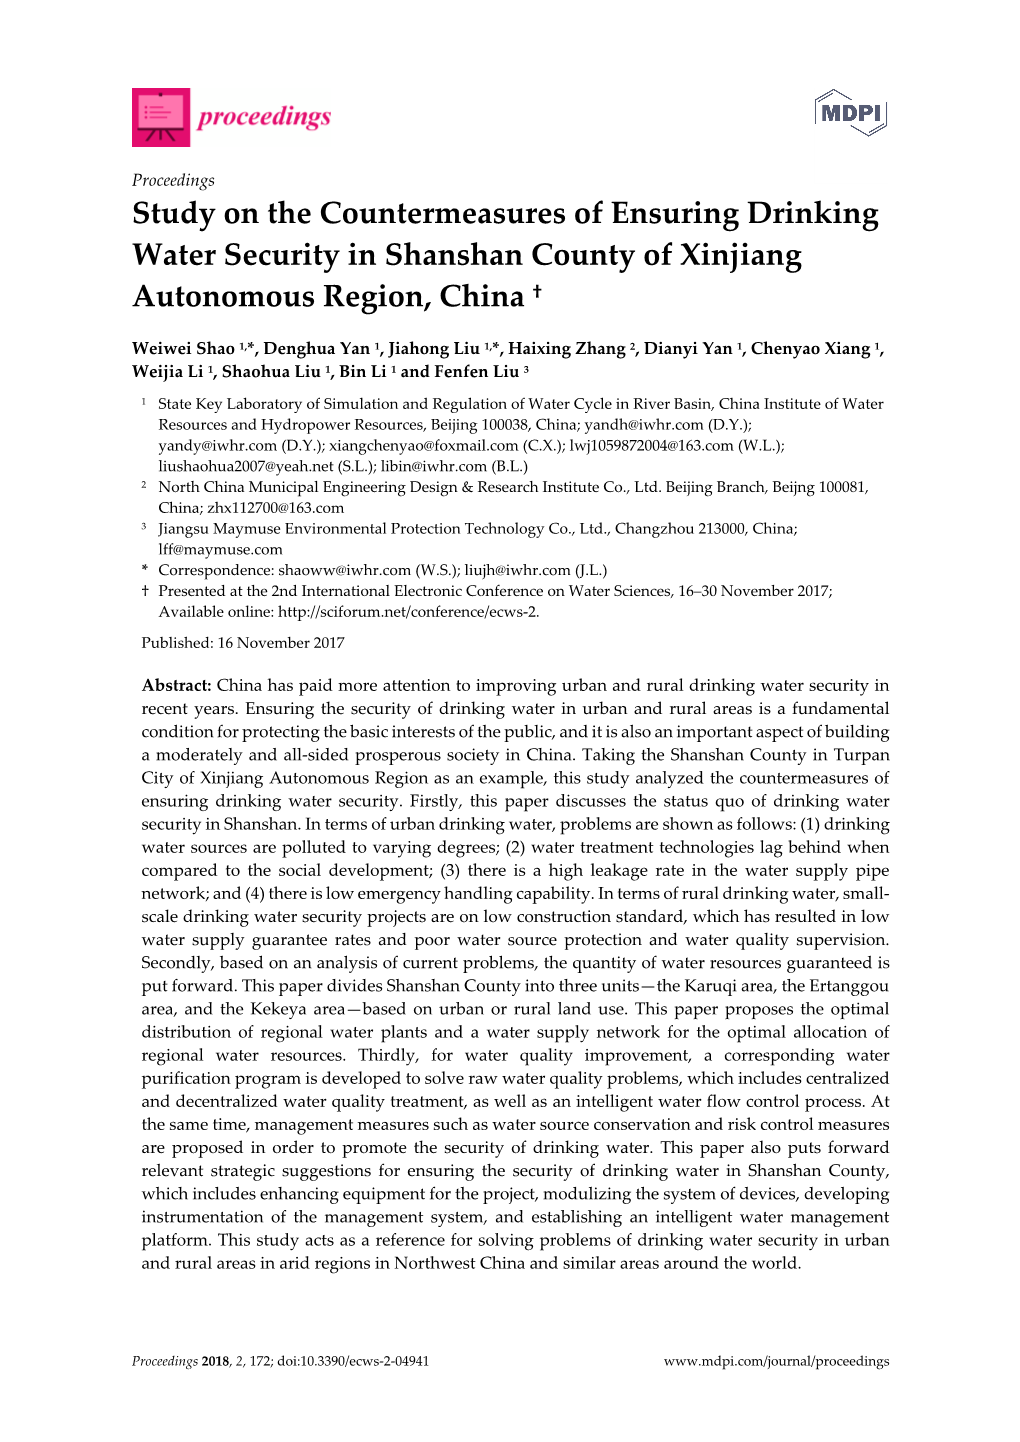 Study on the Countermeasures of Ensuring Drinking Water Security in Shanshan County of Xinjiang Autonomous Region, China †